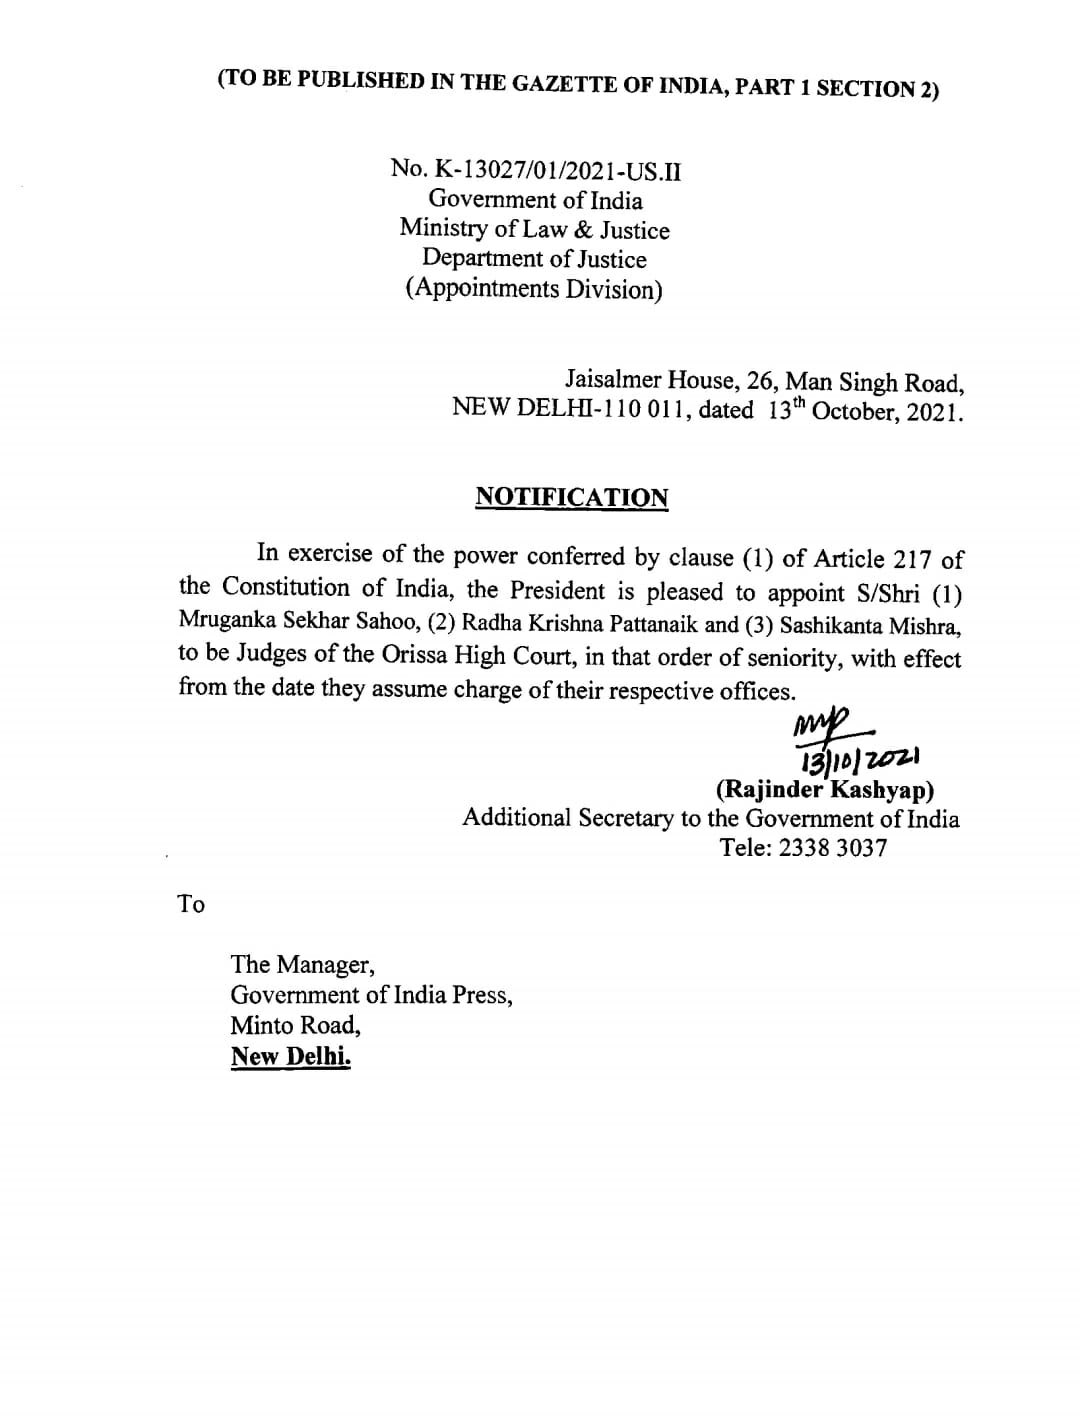 Three new justice appointed in odisha highcourt by president ramanth kovind